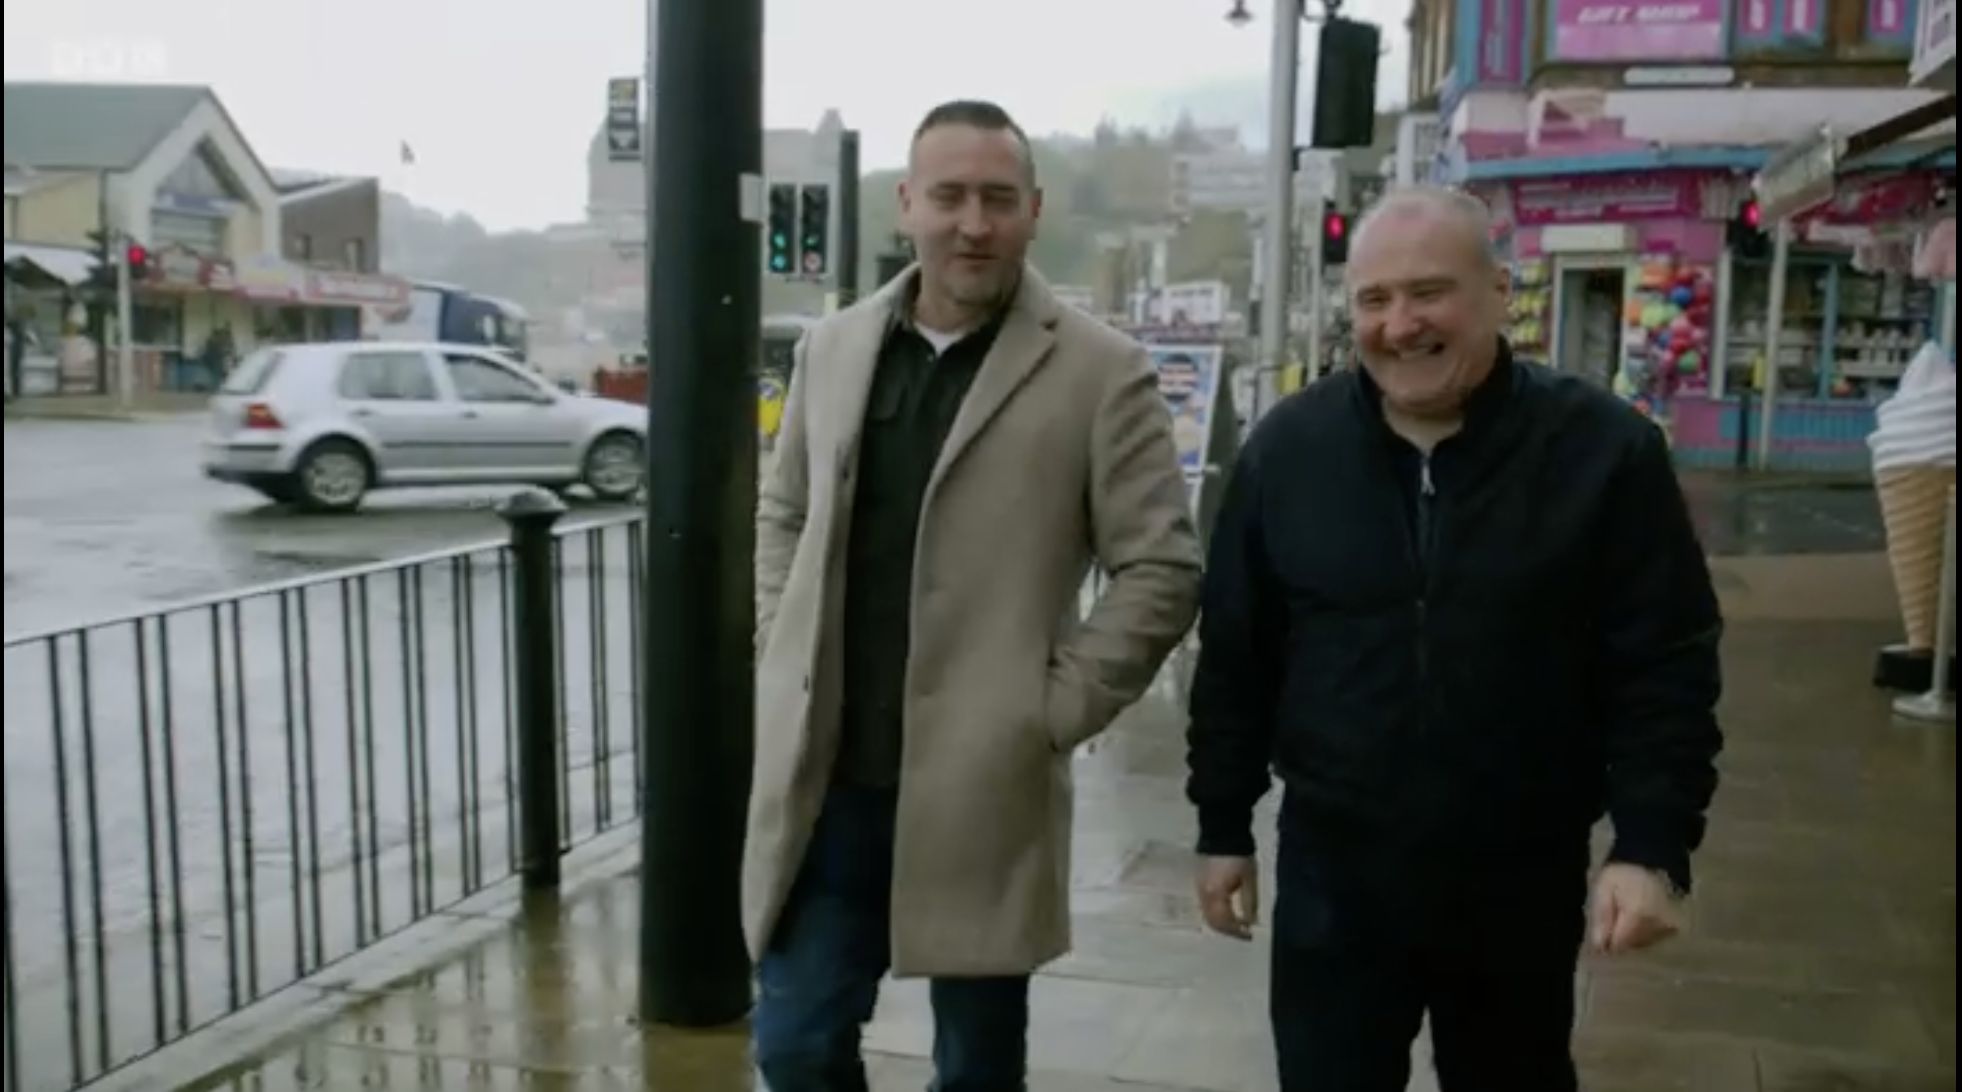 A Trip down Misery Lane: Surviving the Post Office on BBC1